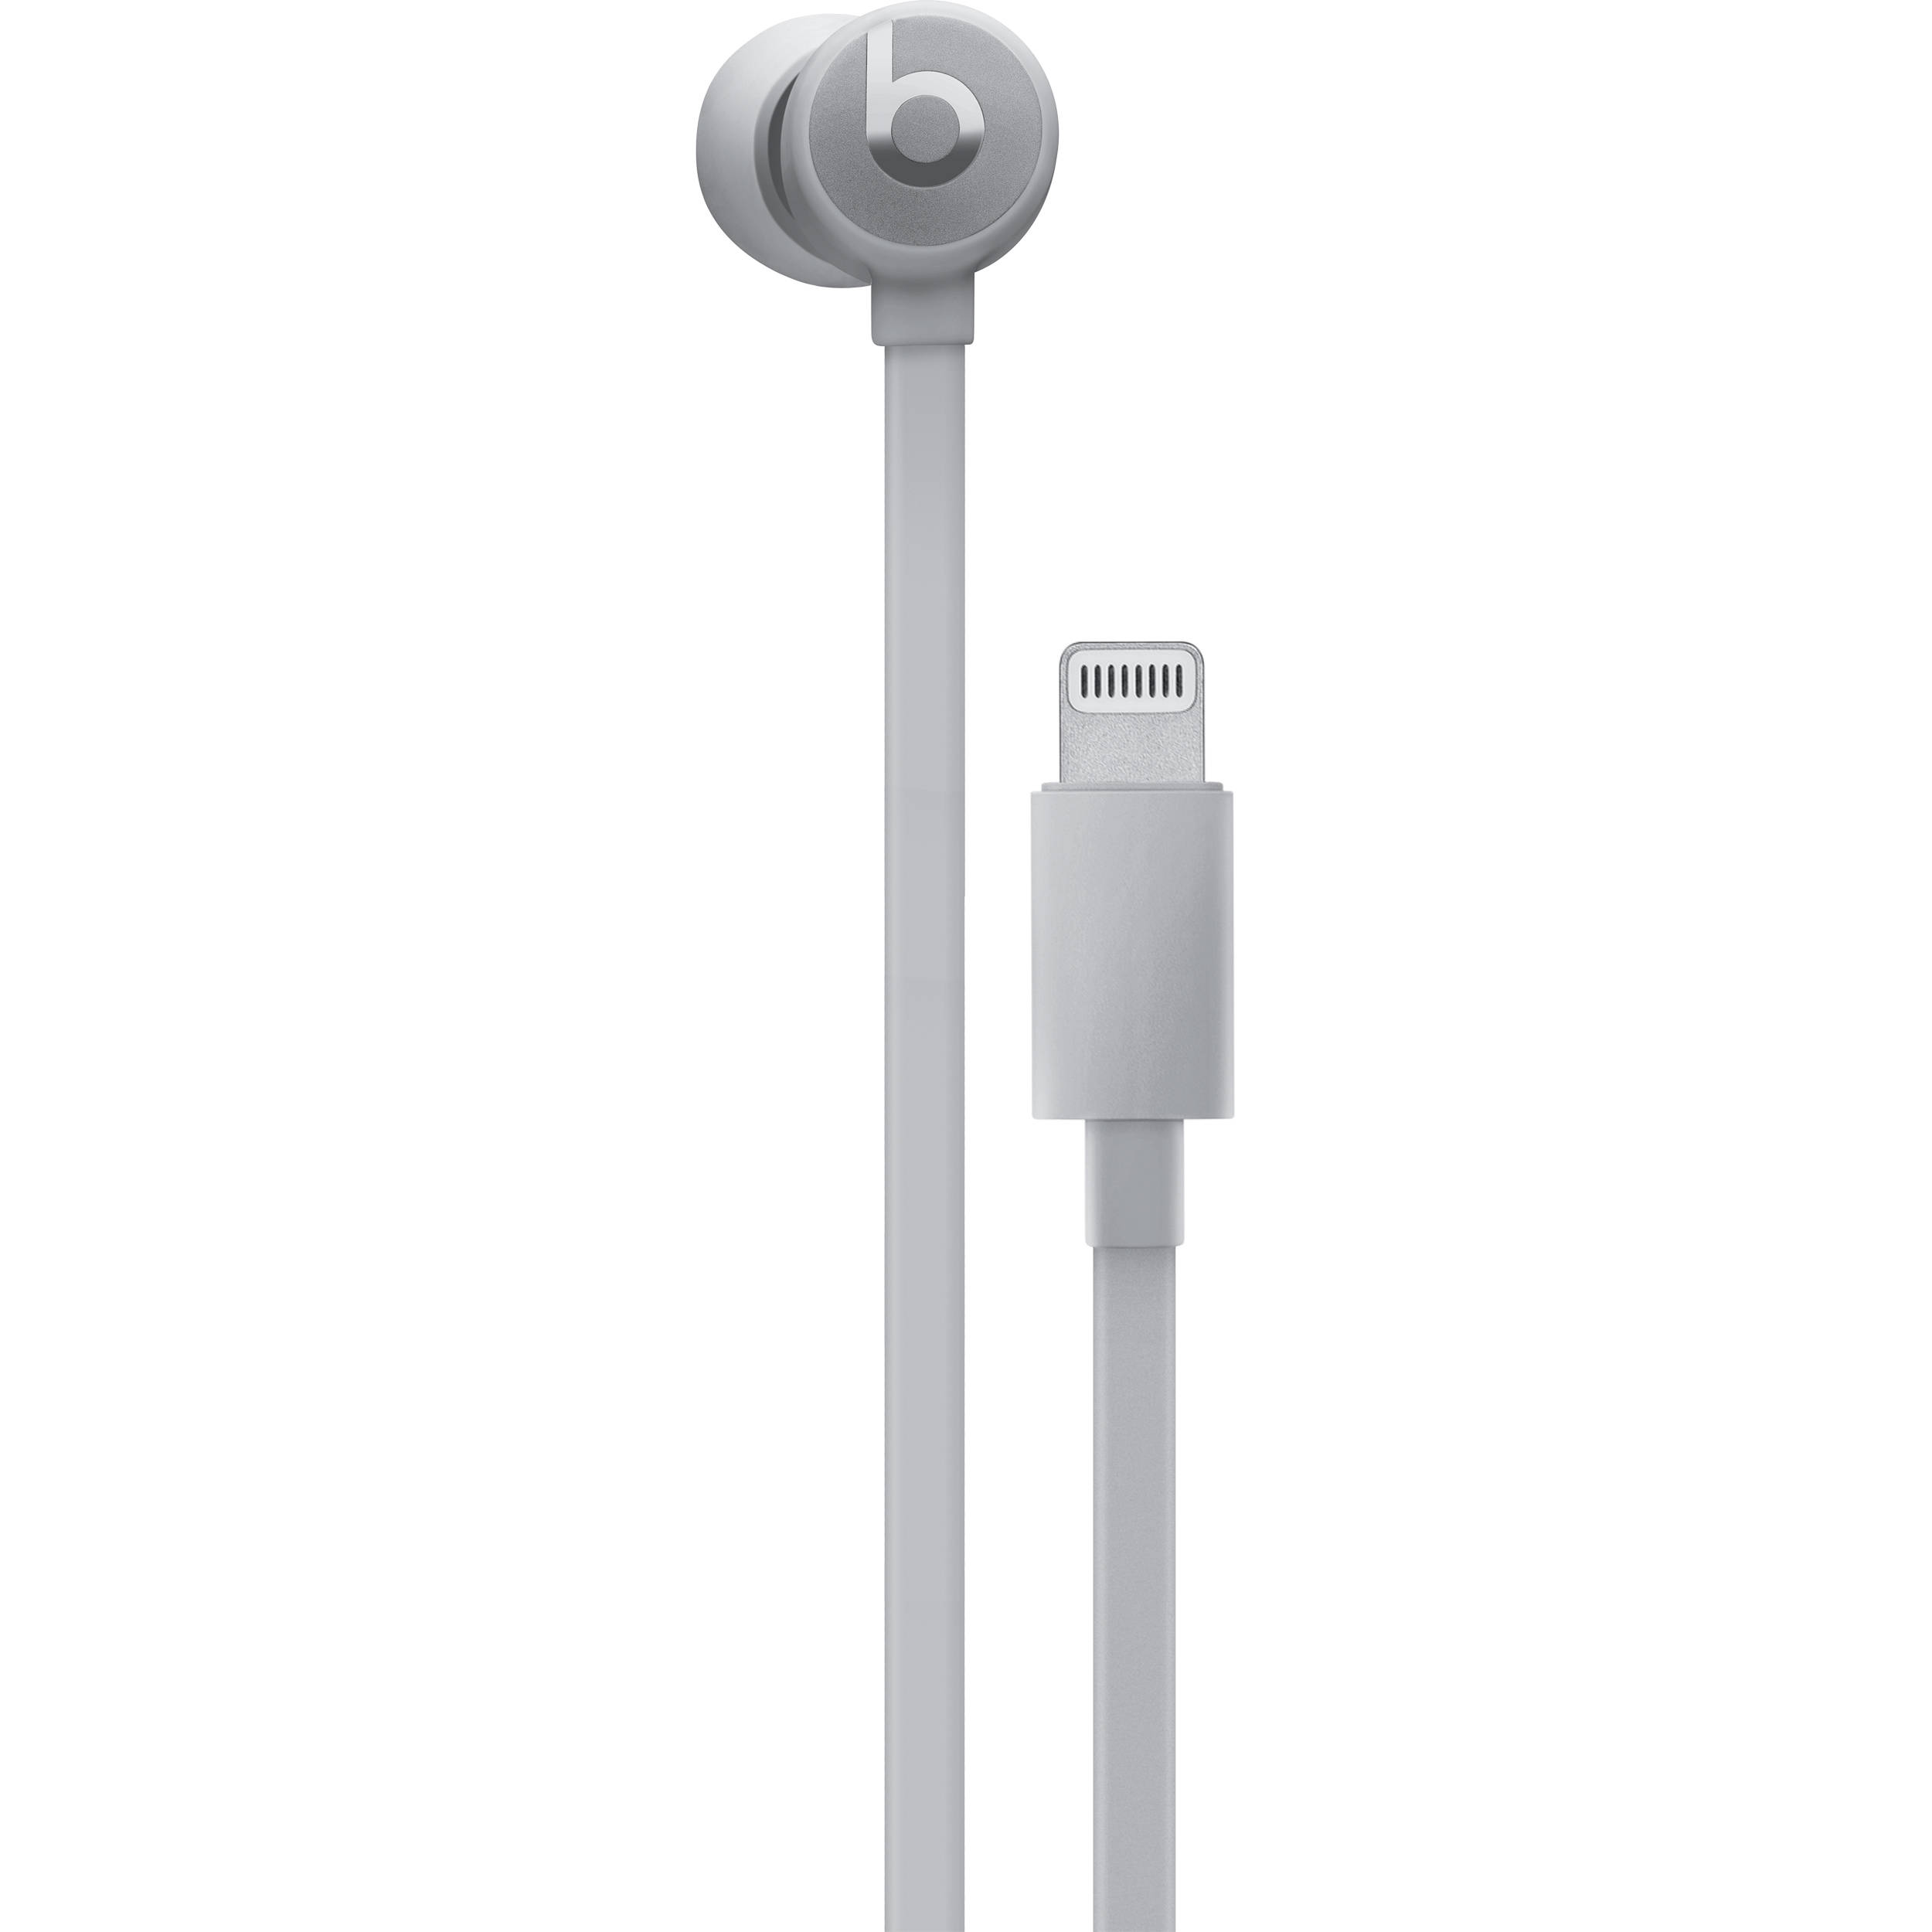 silver beats earbuds